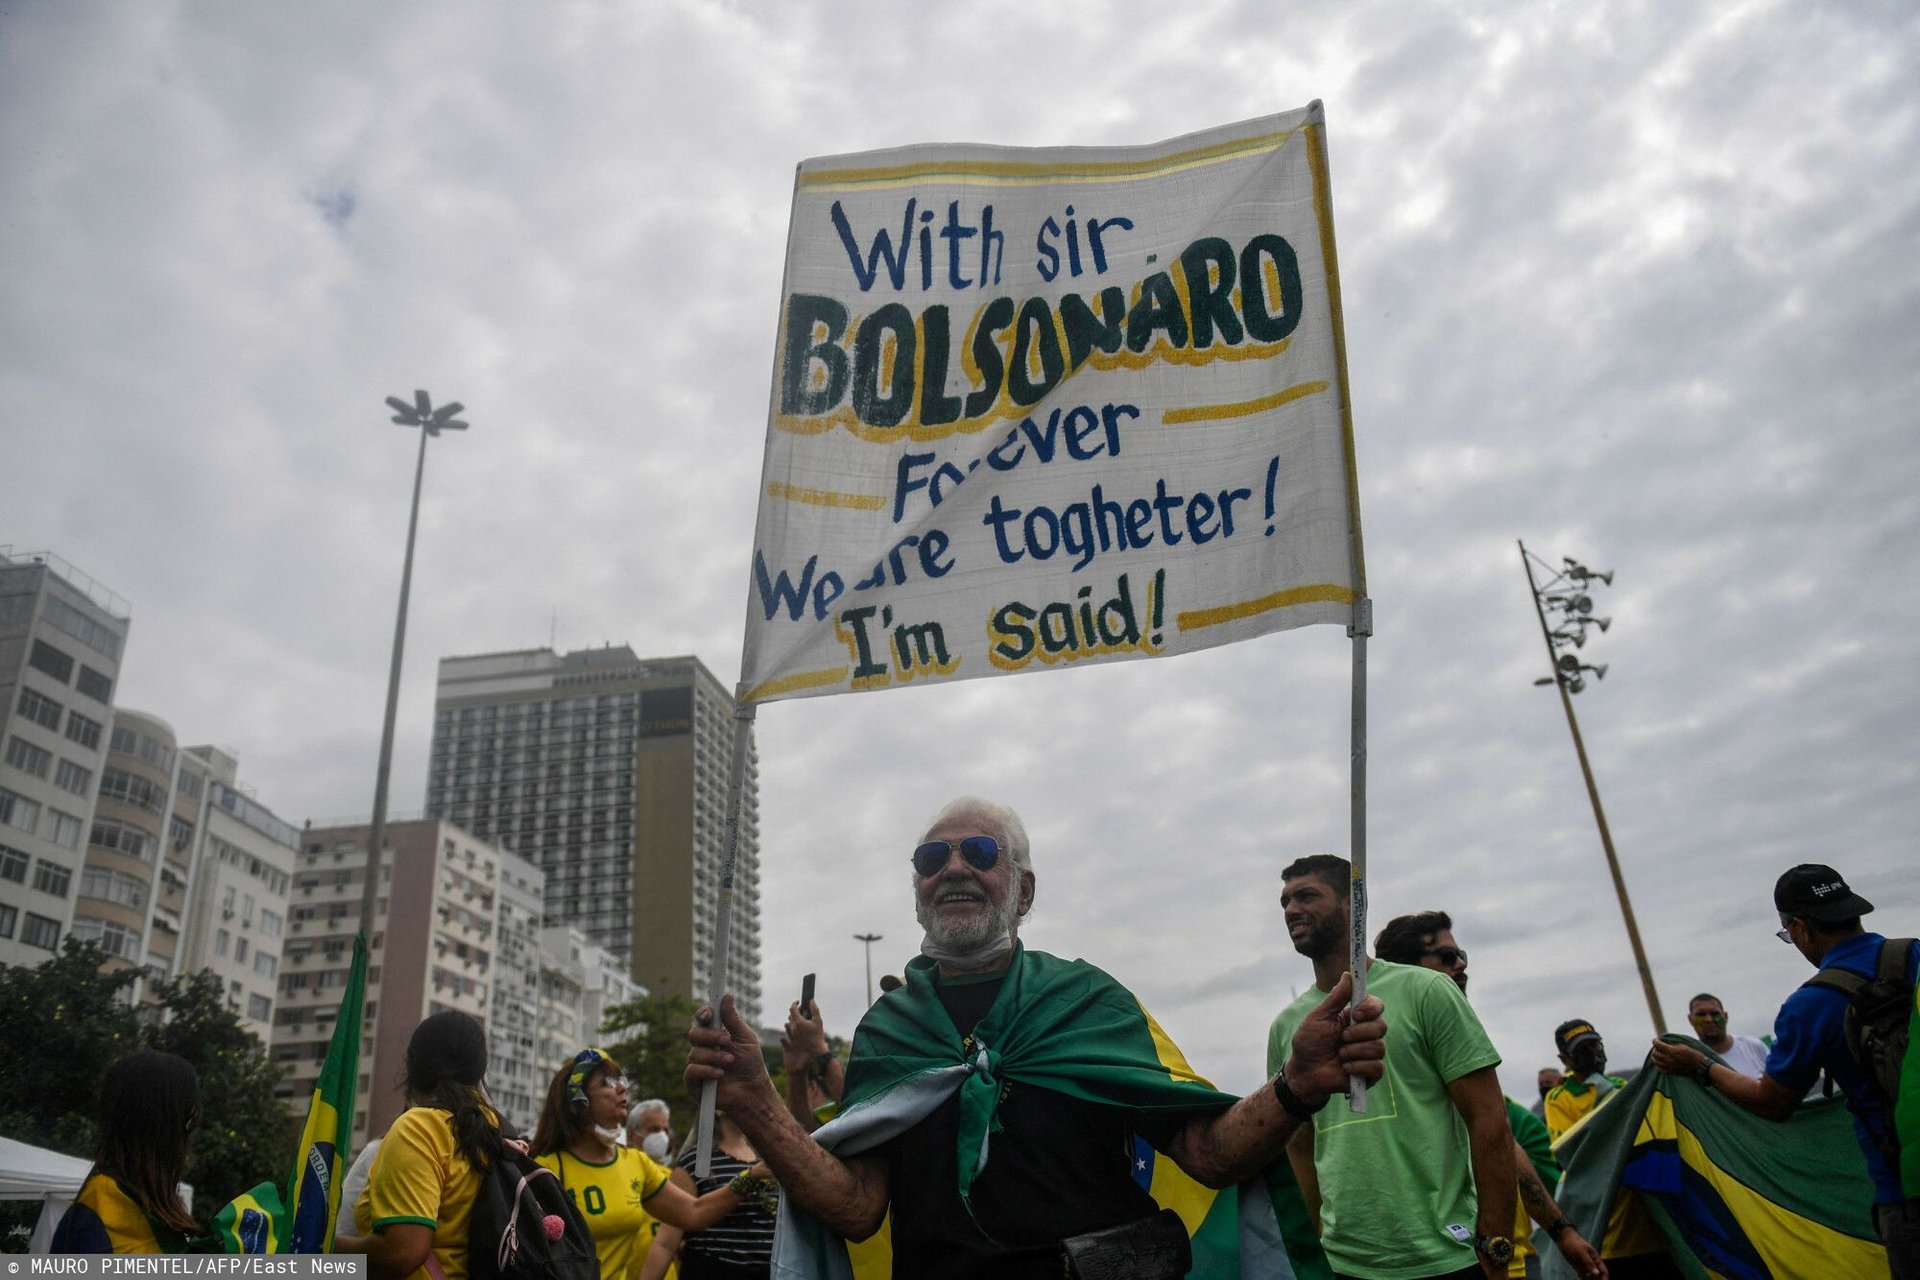 People take part in a demonstration to support Brazilian President Jair Bolsonaro amidst Brazil's Independence Day, at Copacabana beach in Rio de Janeiro, Brazil, on September 7, 2021.